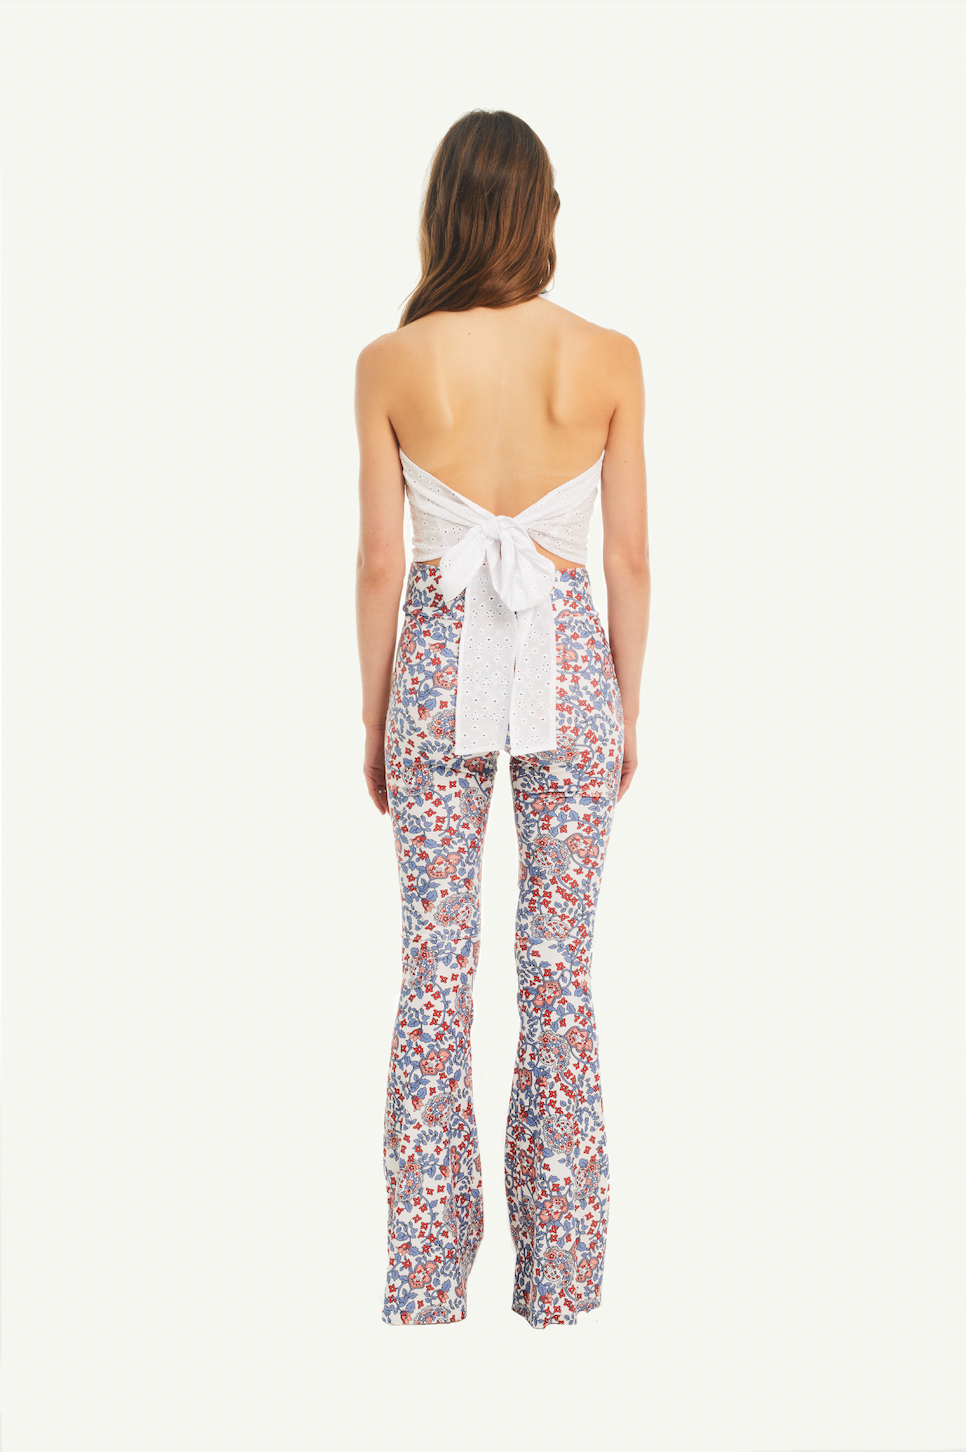 ORCHIDEA - blouse with front volant and nude back in cotton Pergola print